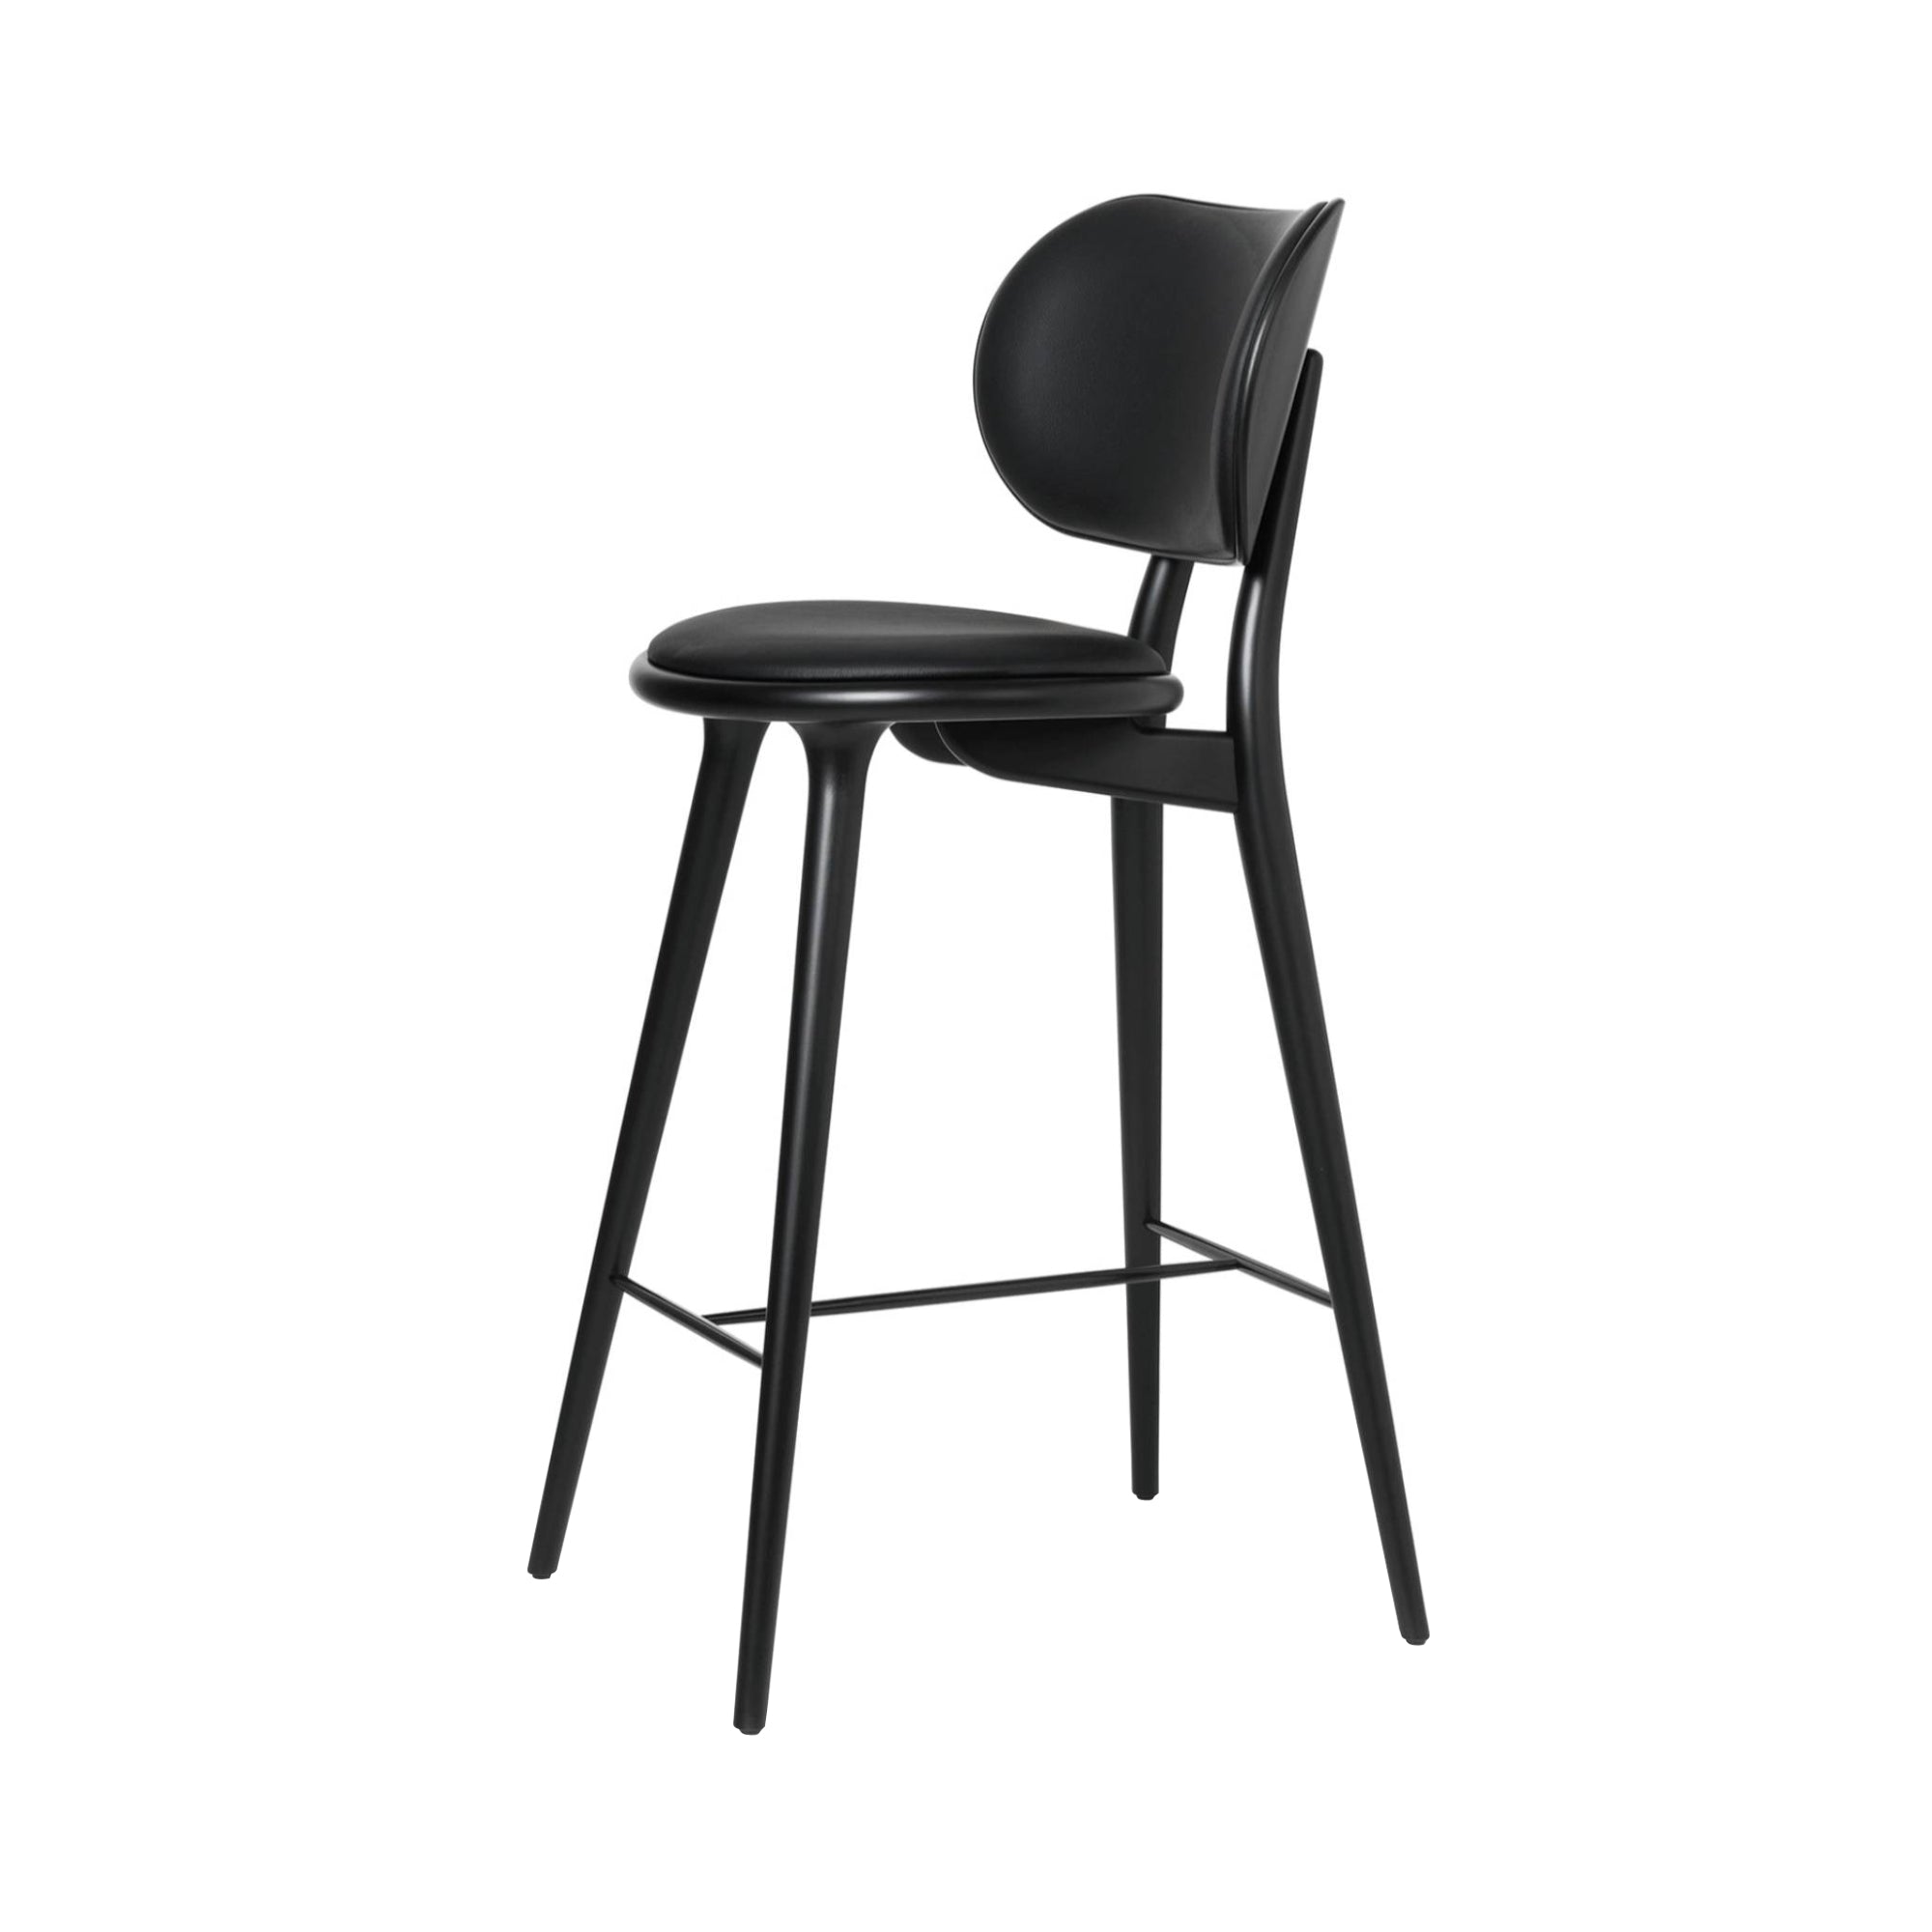 High Stool Backrest: Bar + Black Stained Beech + Black Leather